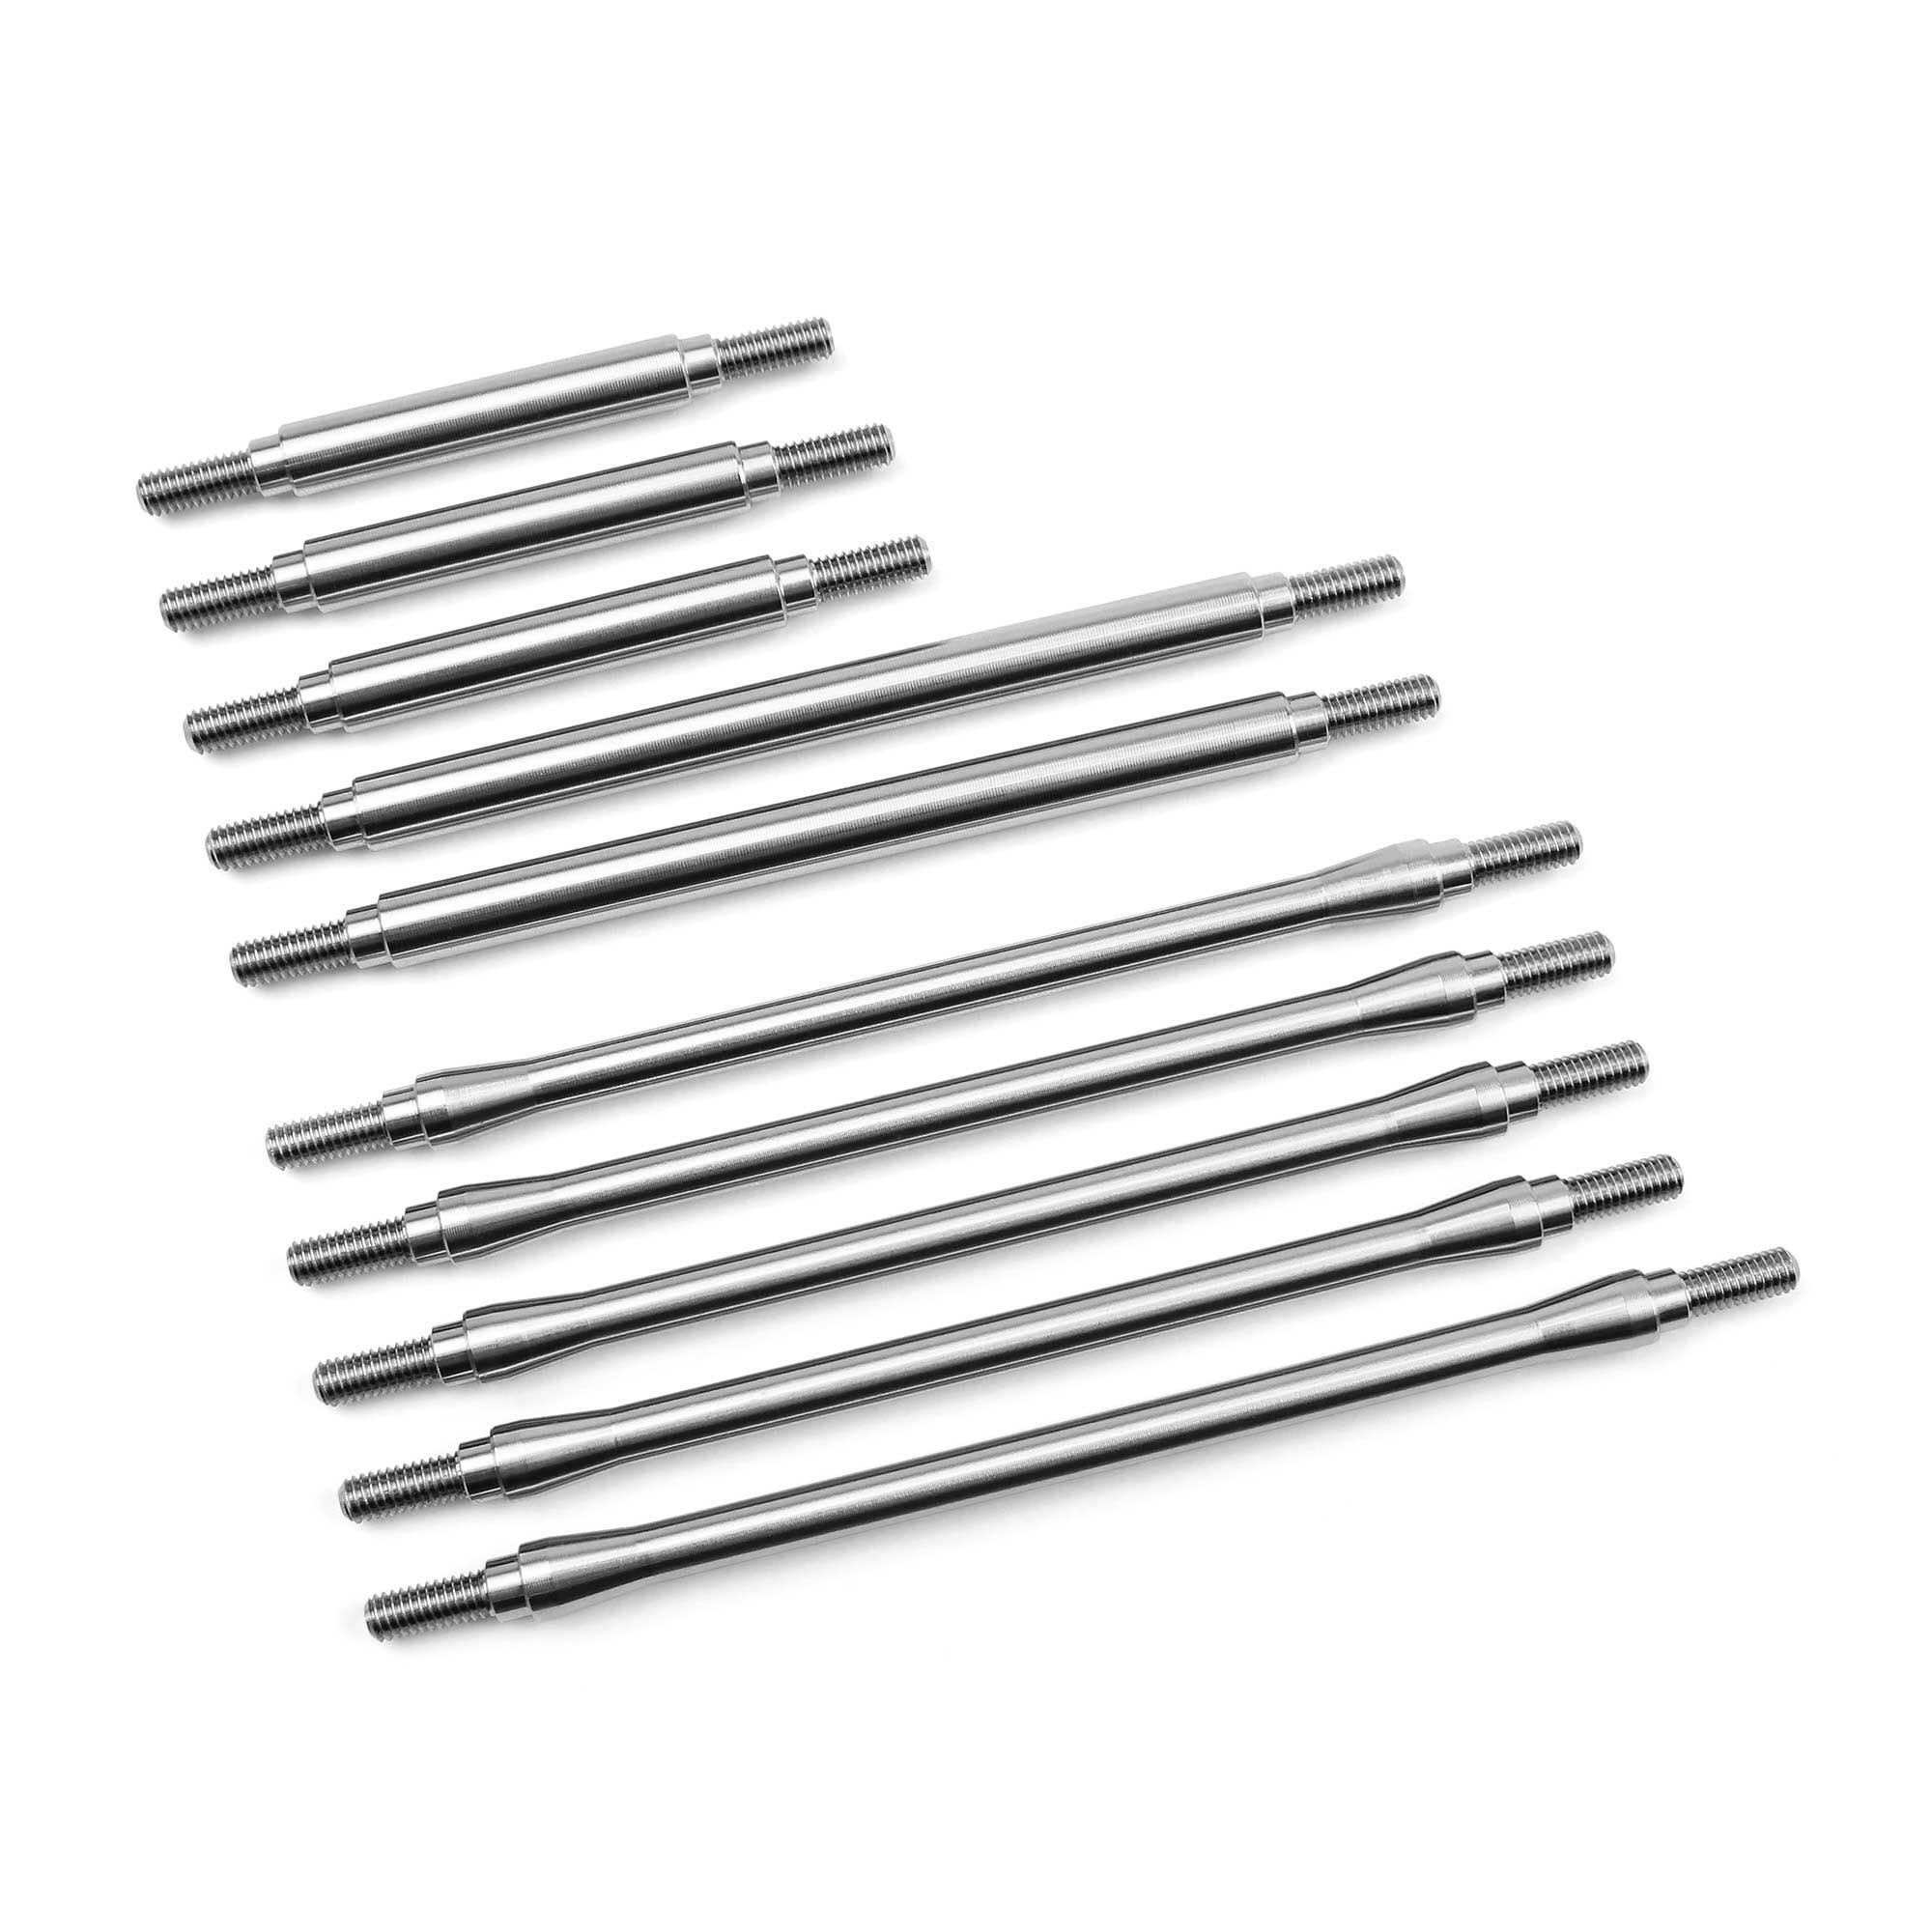 Vanquish Irc00201 Incision TRX-4 Stainless Steel 10pc Link Kit 12.3 Inch